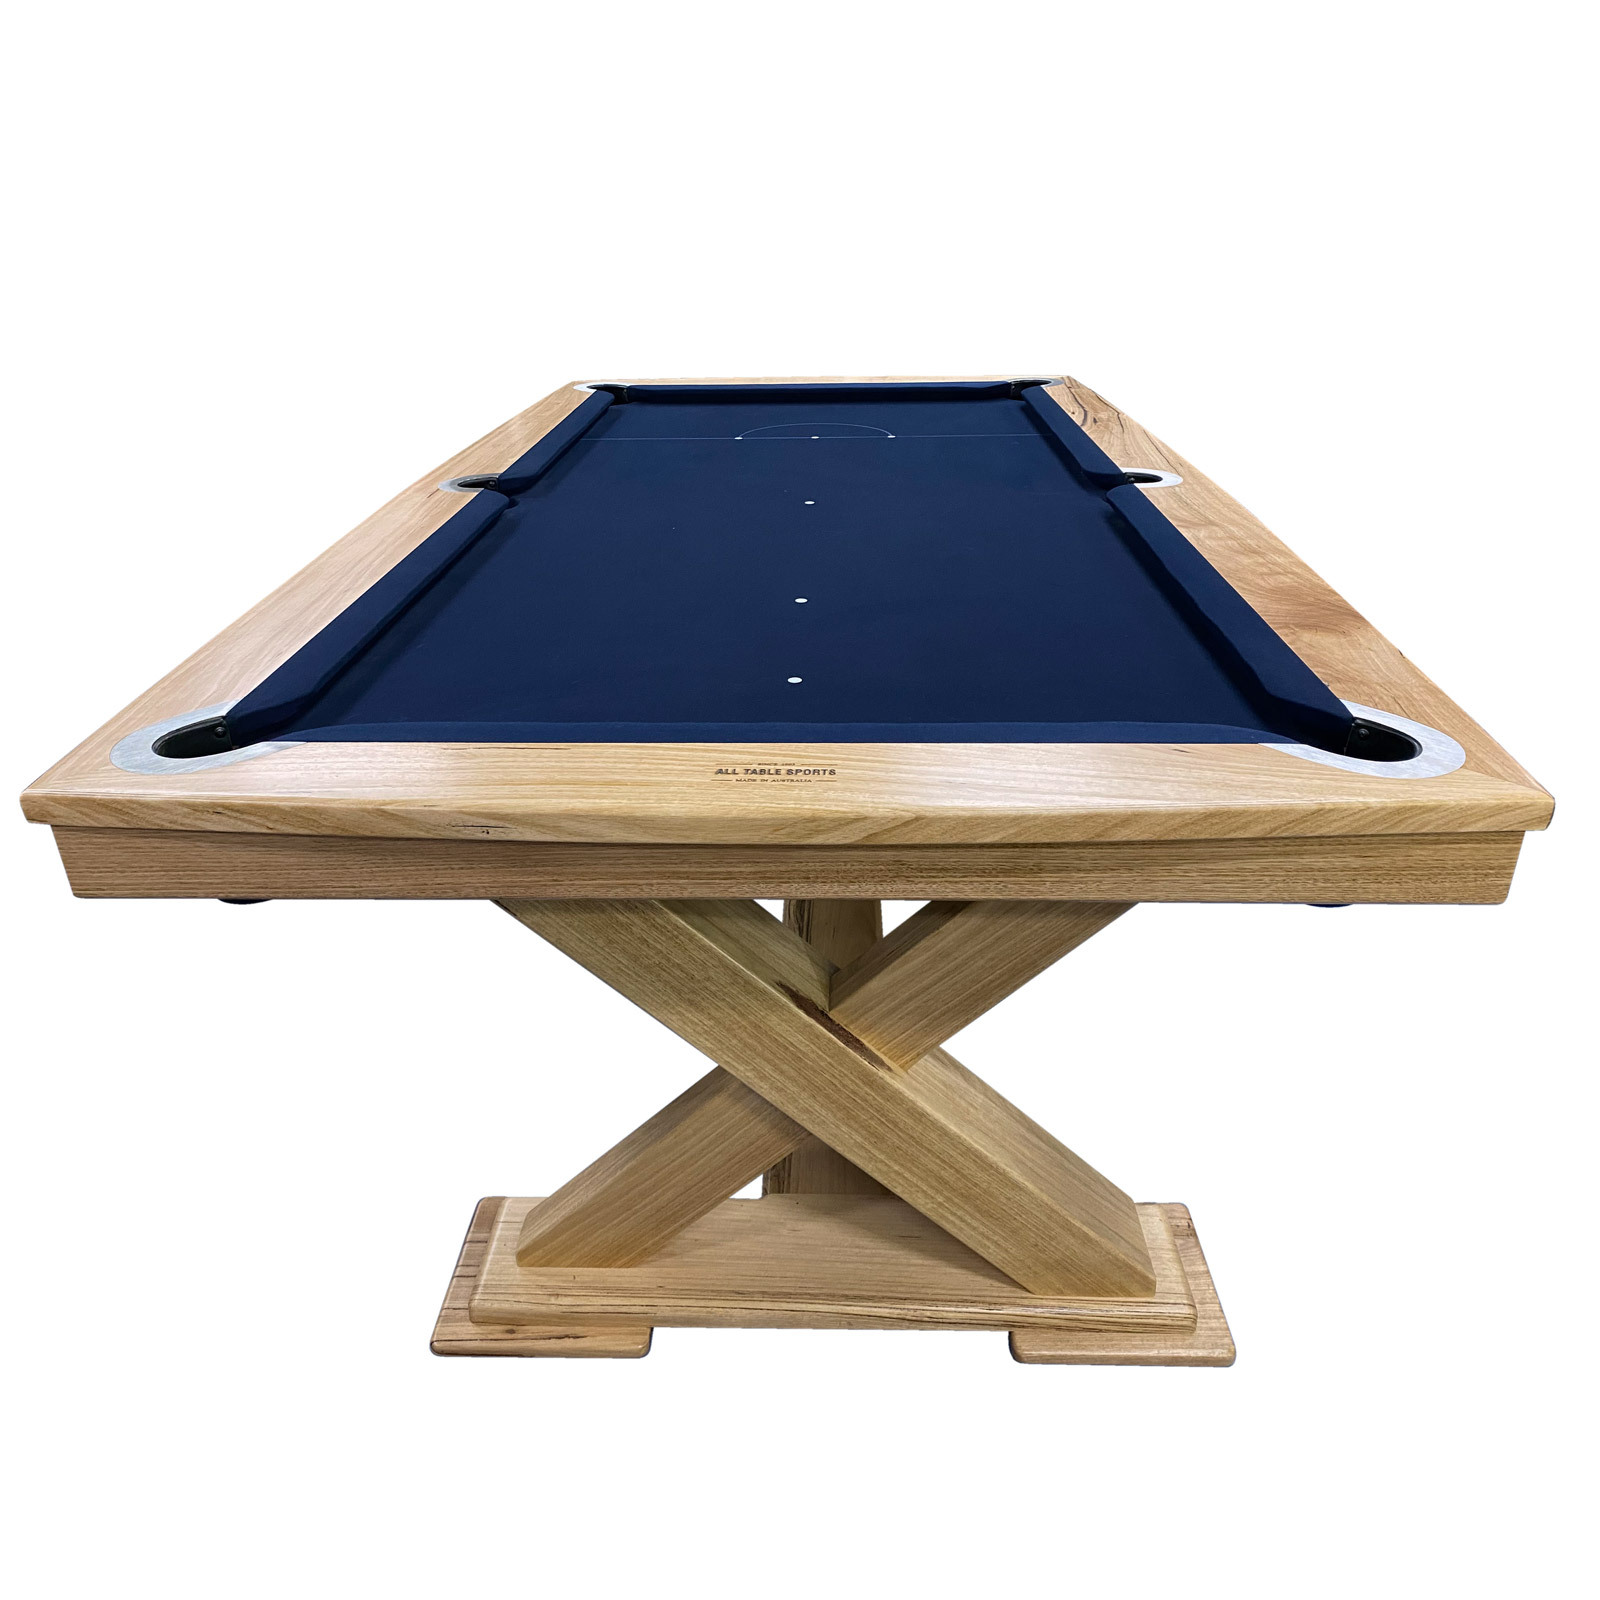 PRE-MADE 7 Foot Slate Southern Cross Pool Billiards Table with Messmate timber